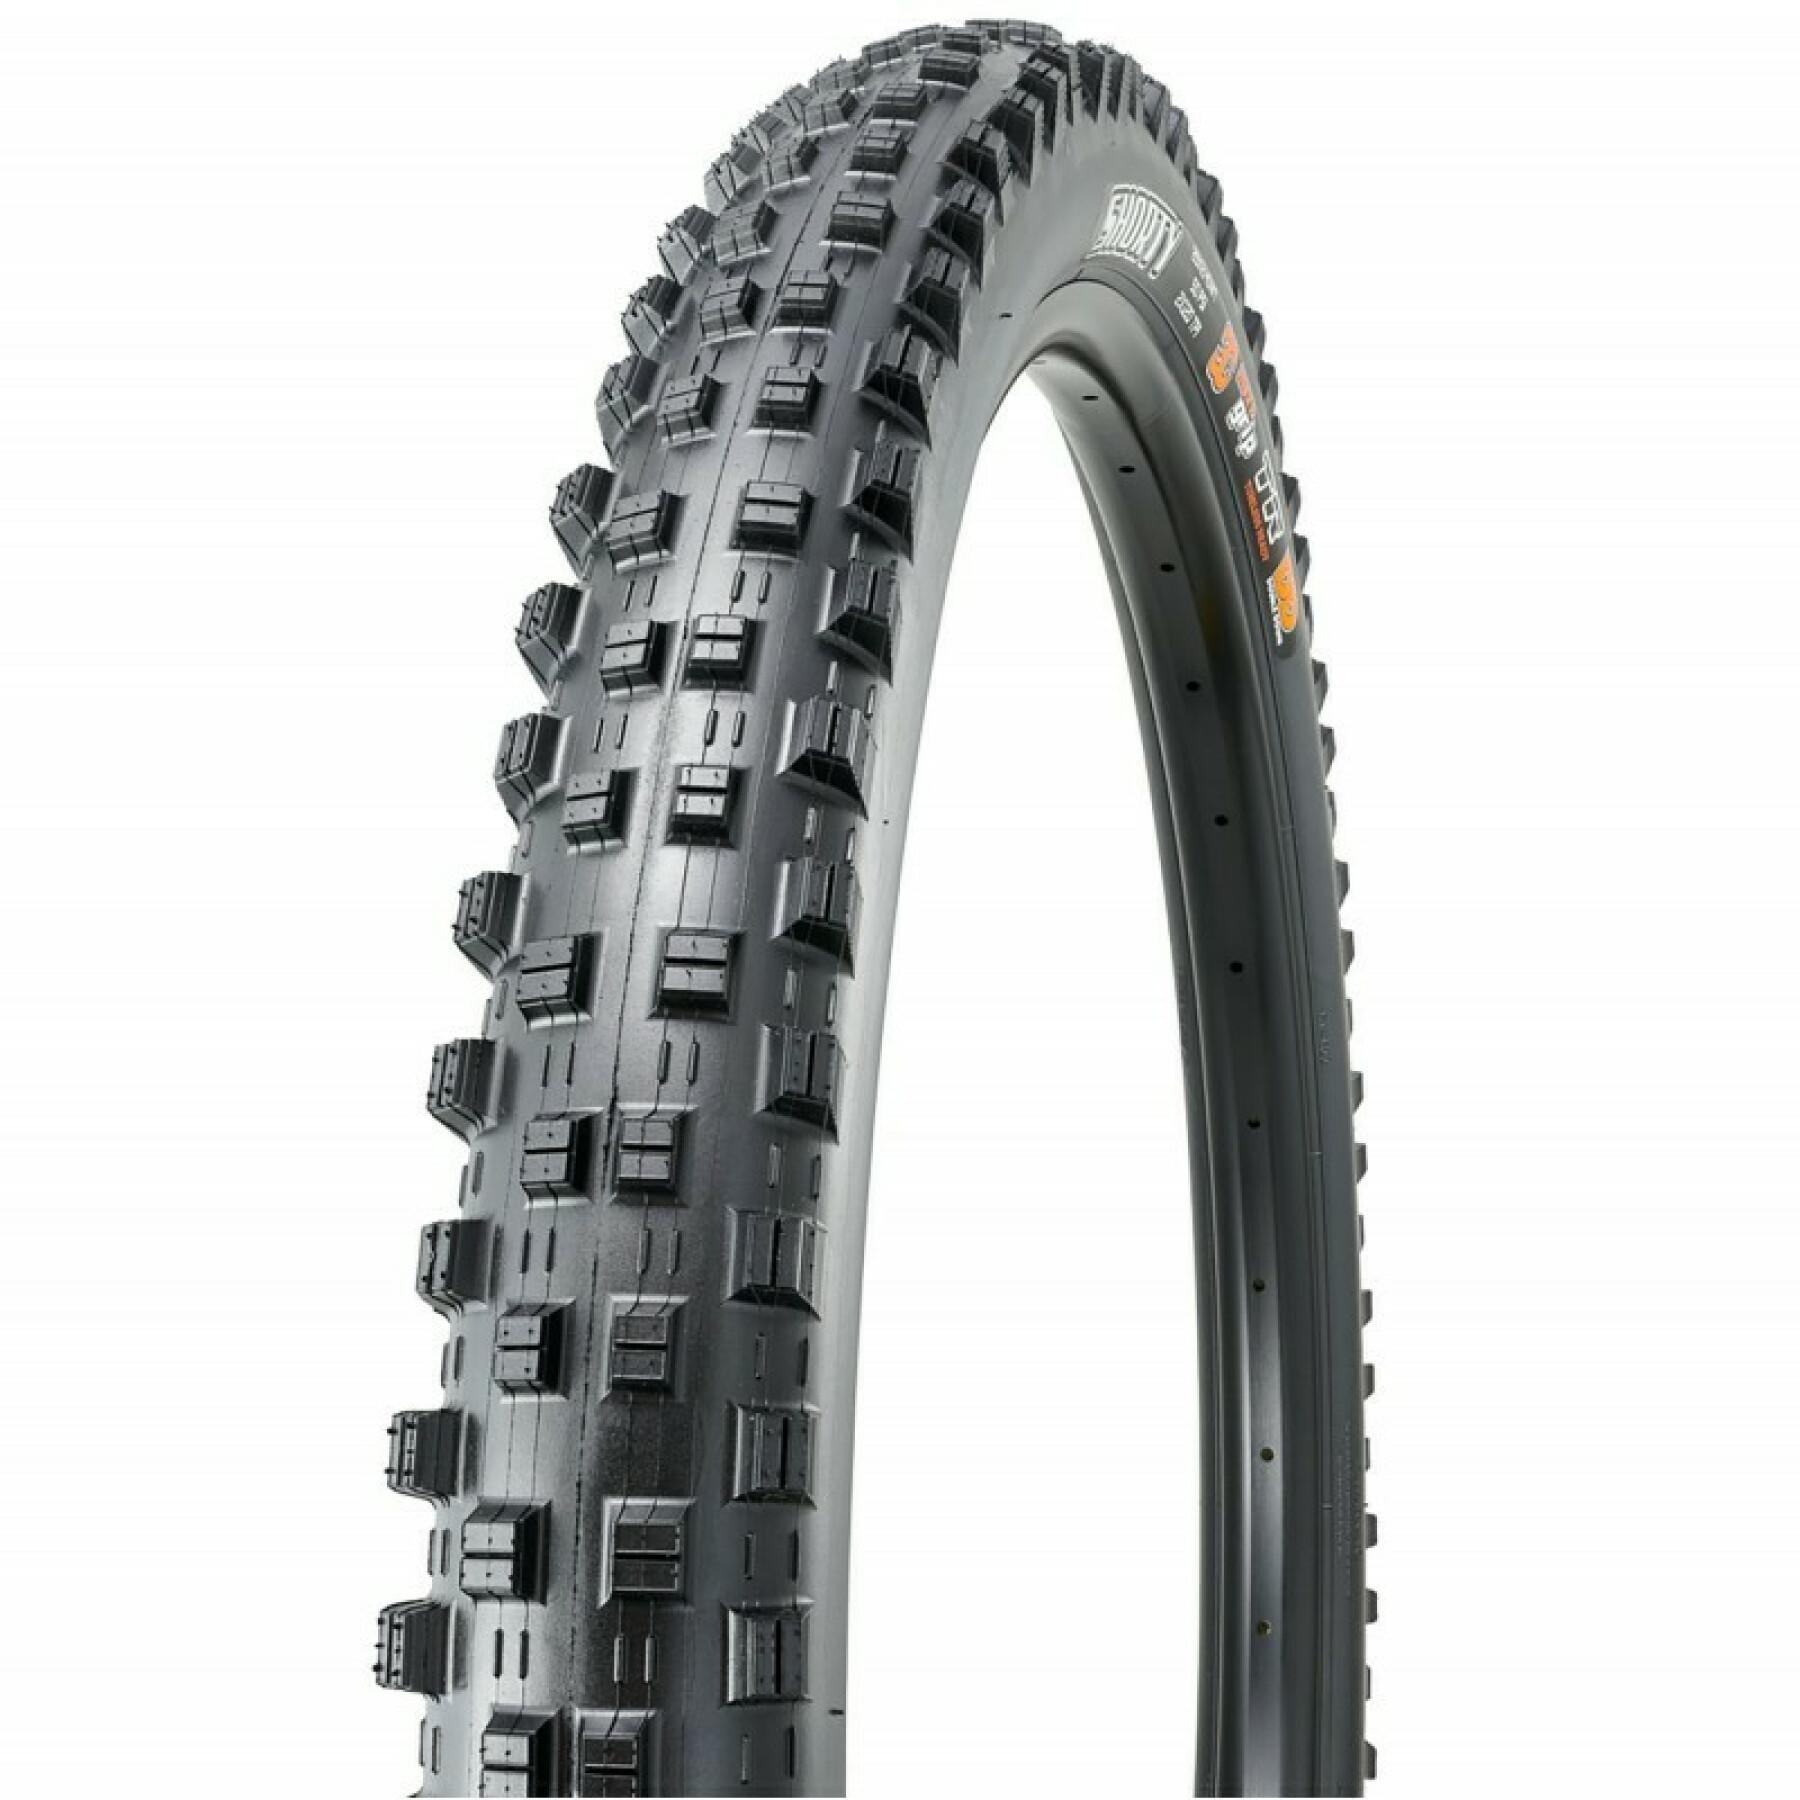 Soft tire Maxxis Shorty 29x2.40wt 3c Grip / Tubeless Ready / dh